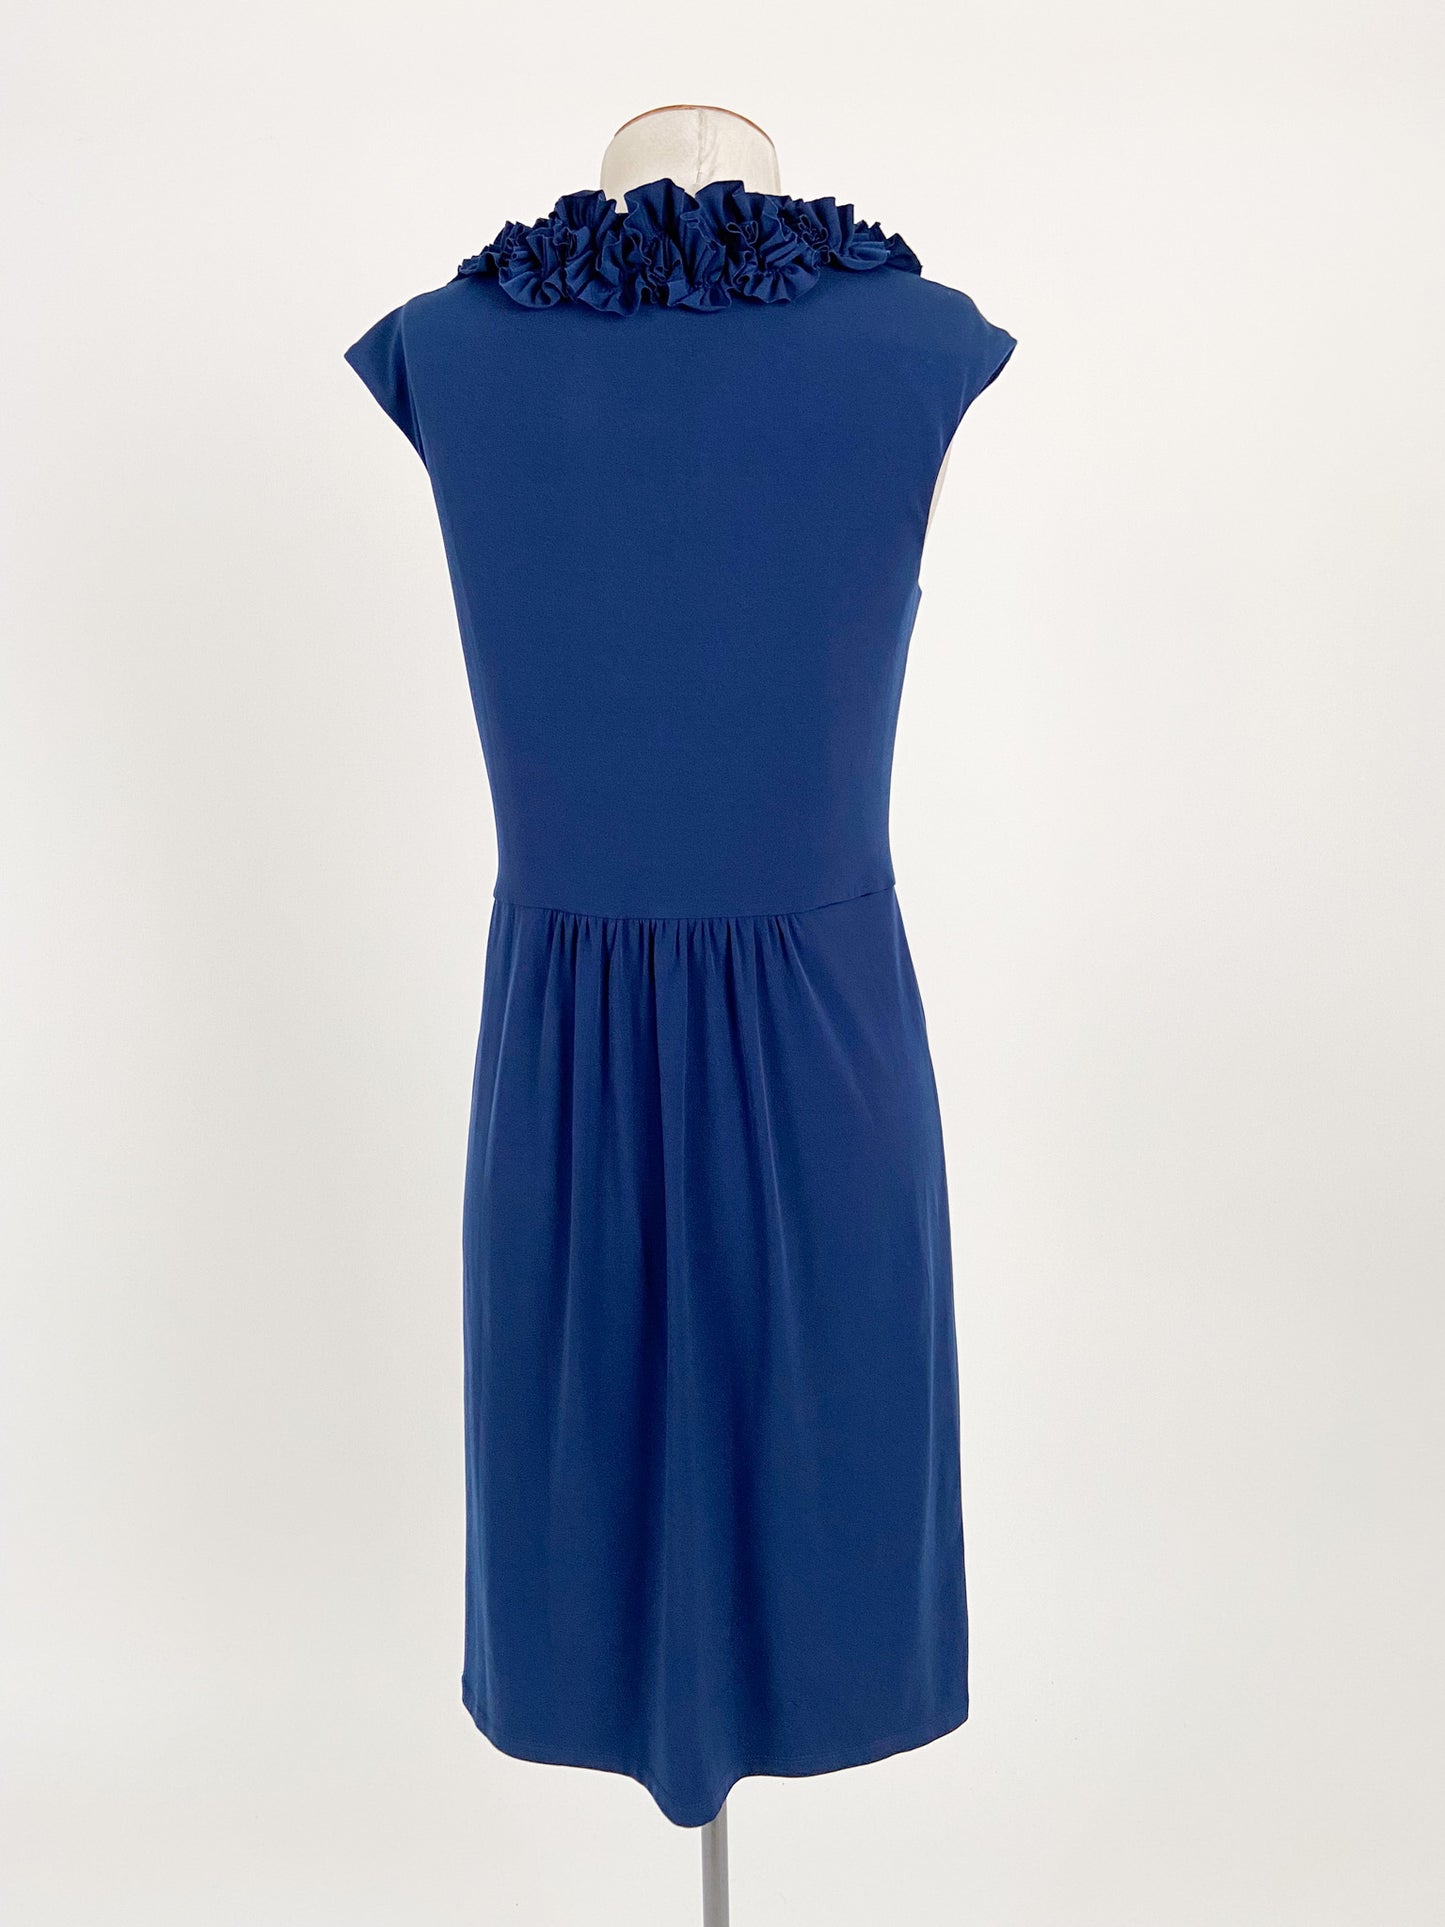 Maggy London | Navy Formal/Workwear Dress | Size 8